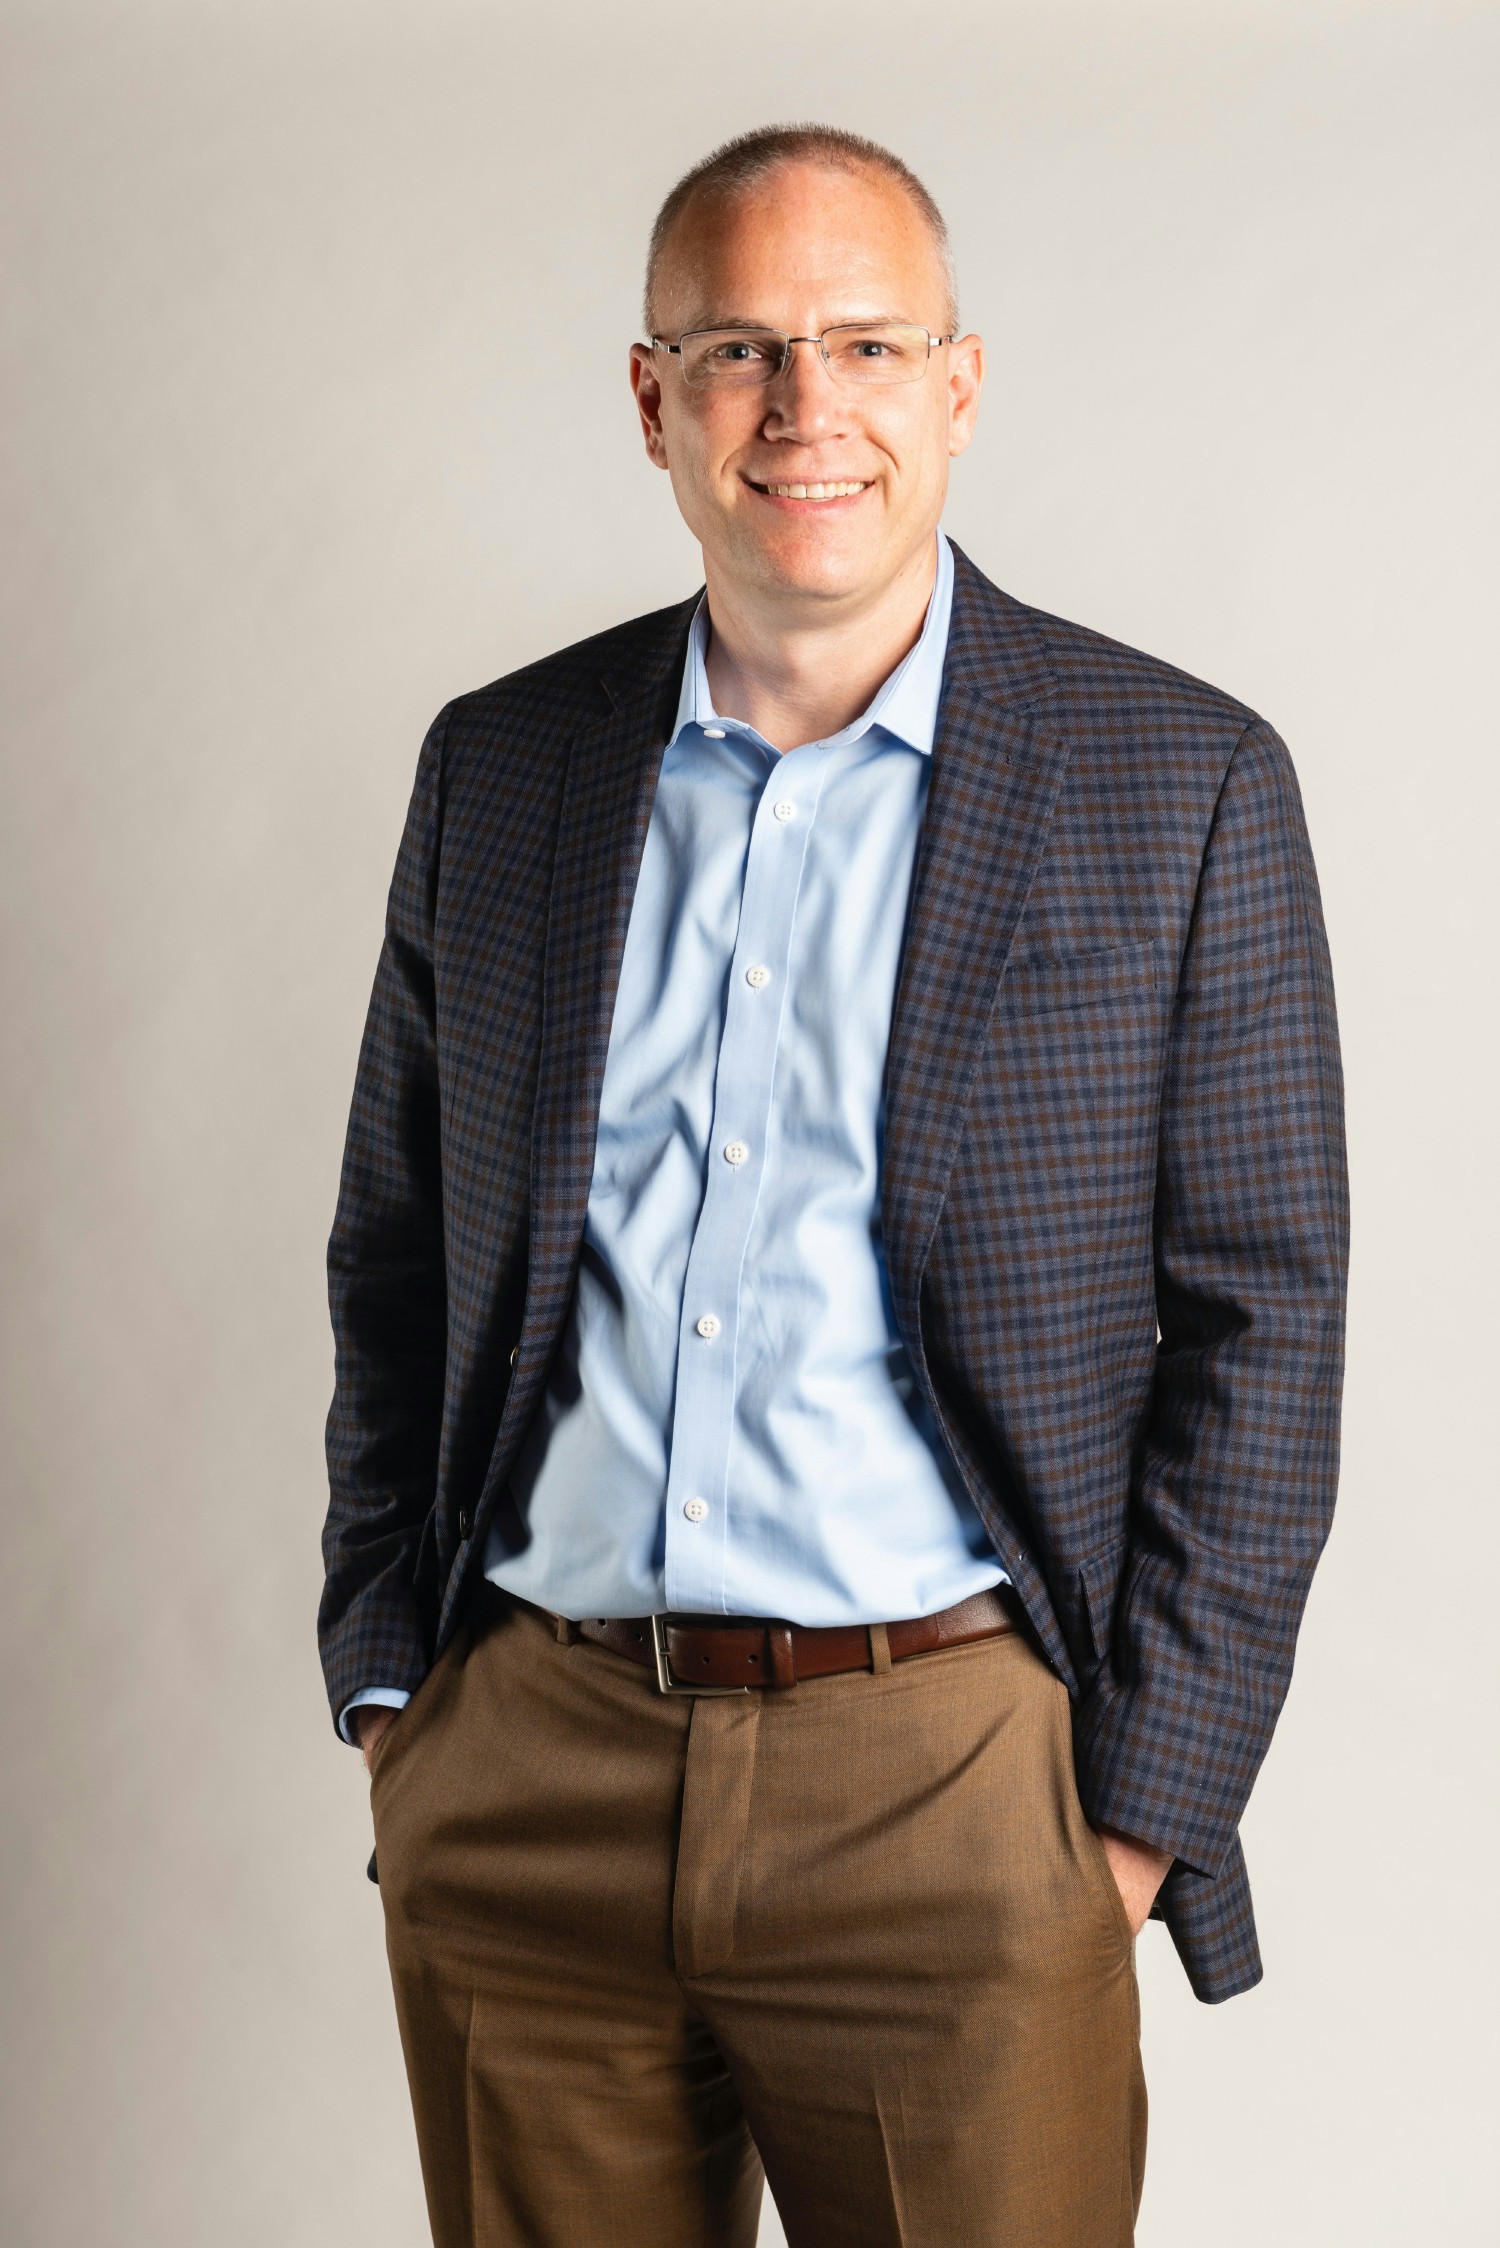 Jeff Dill, CEO